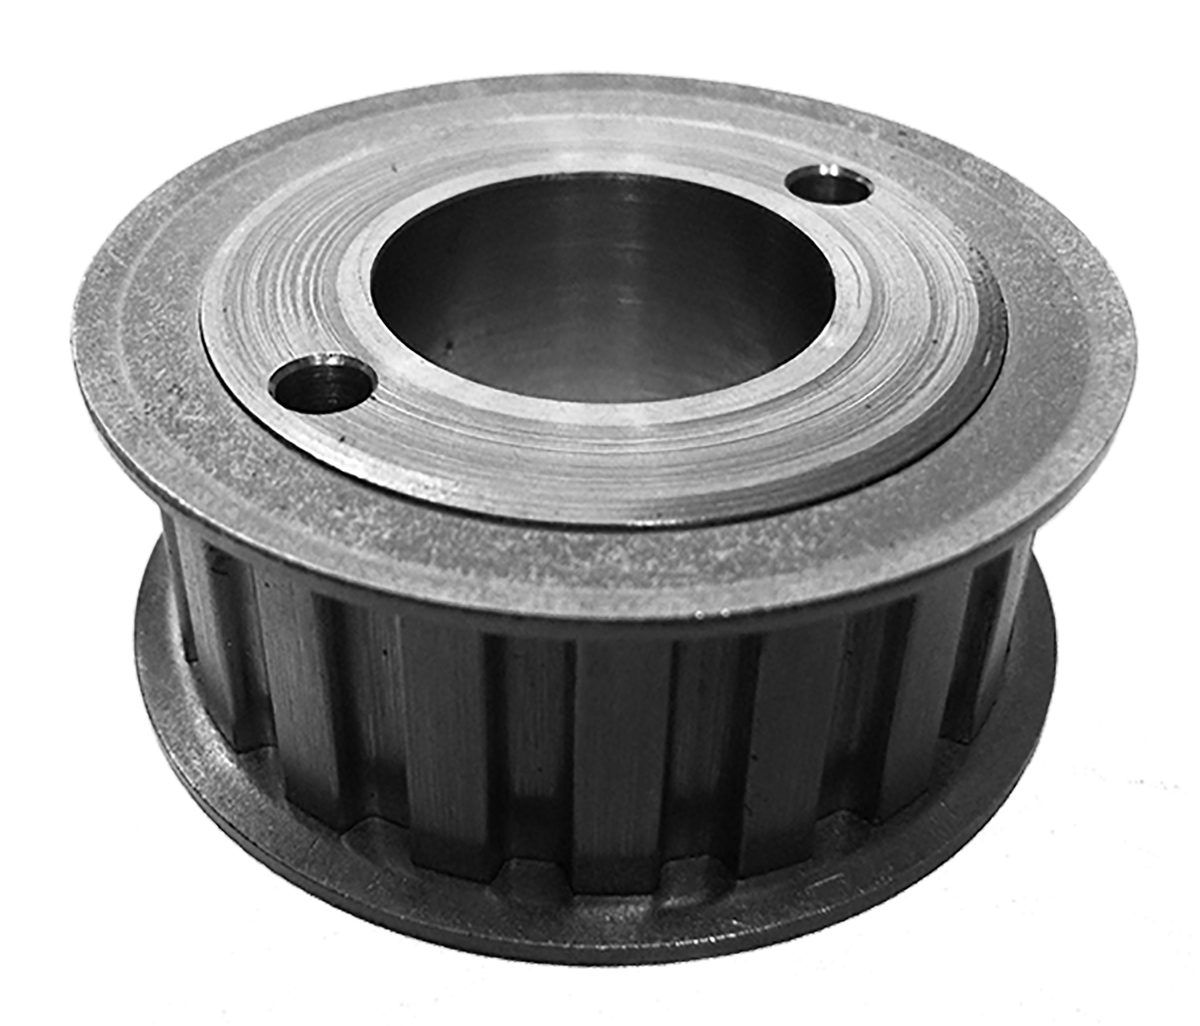 18LG075 - Steel Imperial Pitch Pulleys